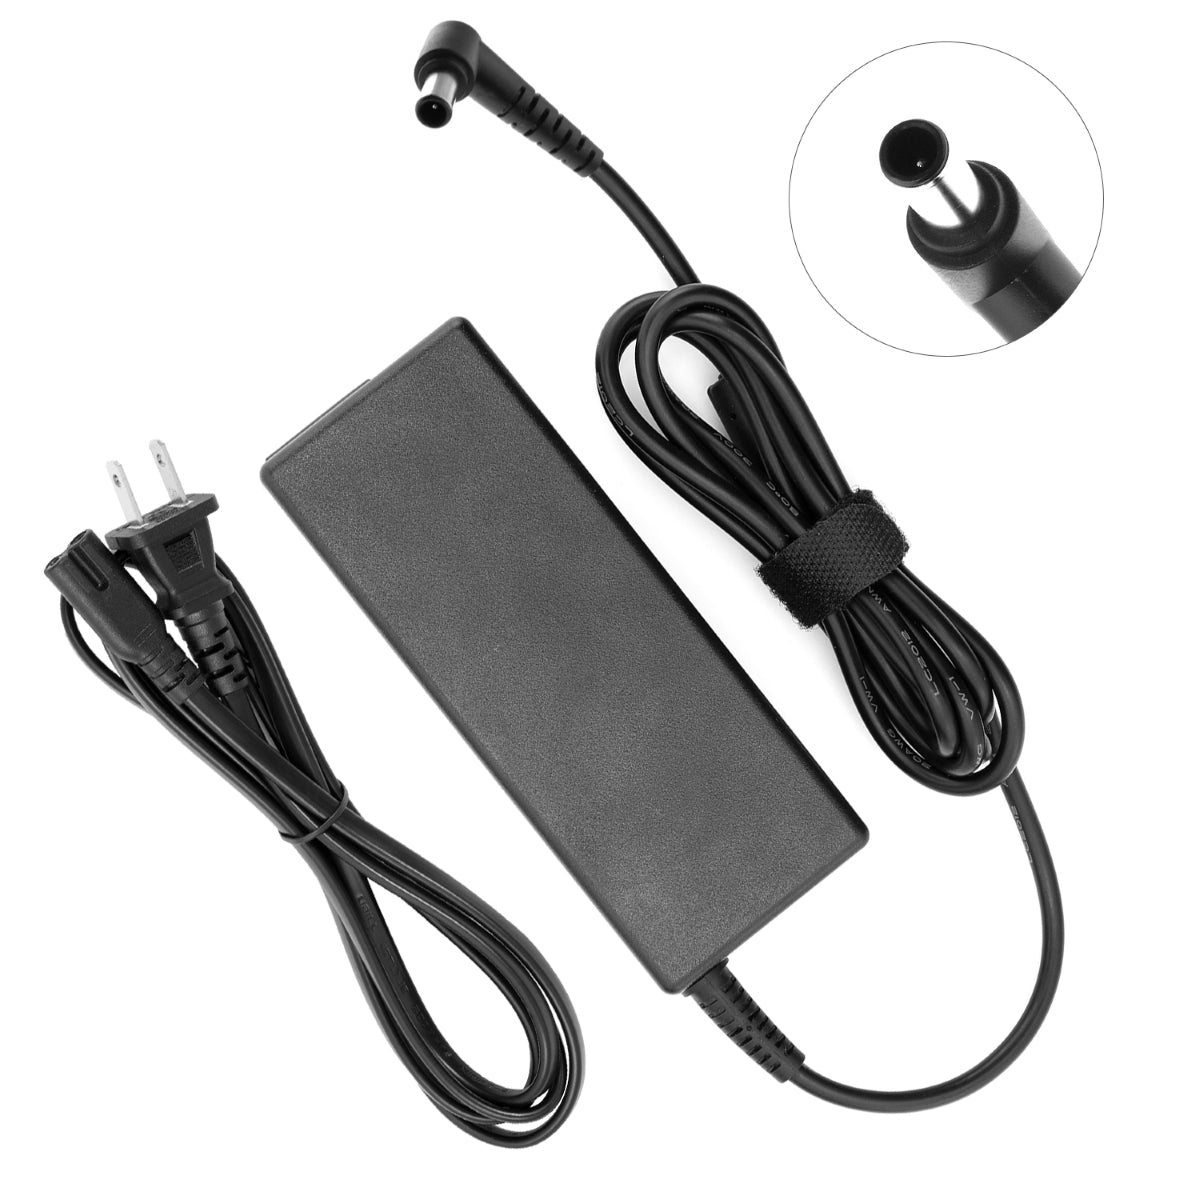 Power Adapter for LG 27UK650-W Monitor TV